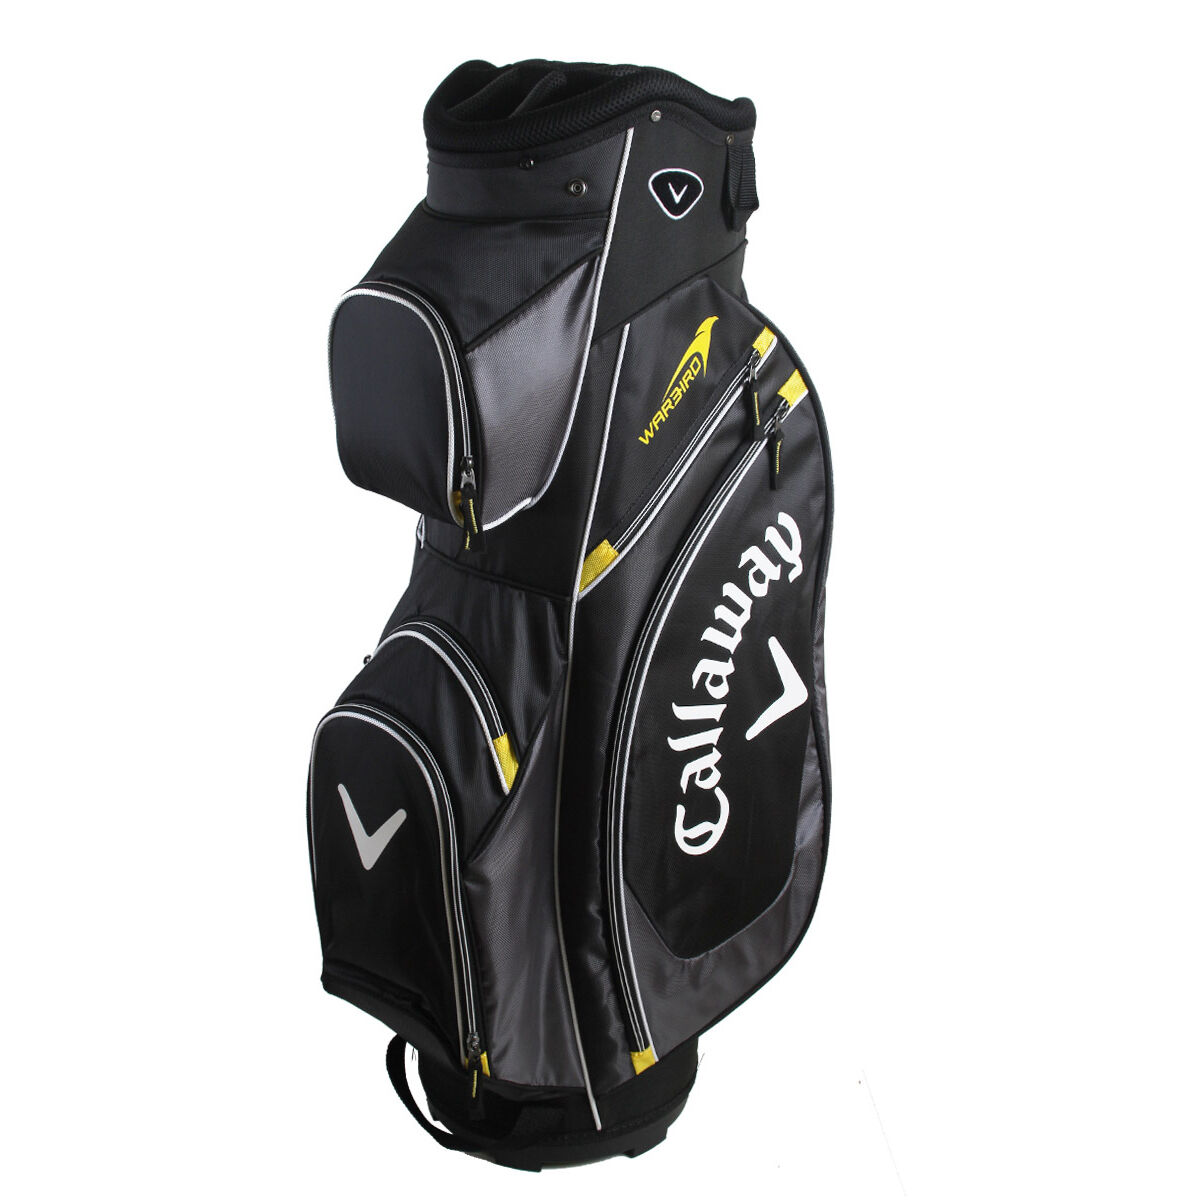 Callaway Golf Black and Charcoal Grey Warbird Golf Cart Bag, Size: One Size | American Golf